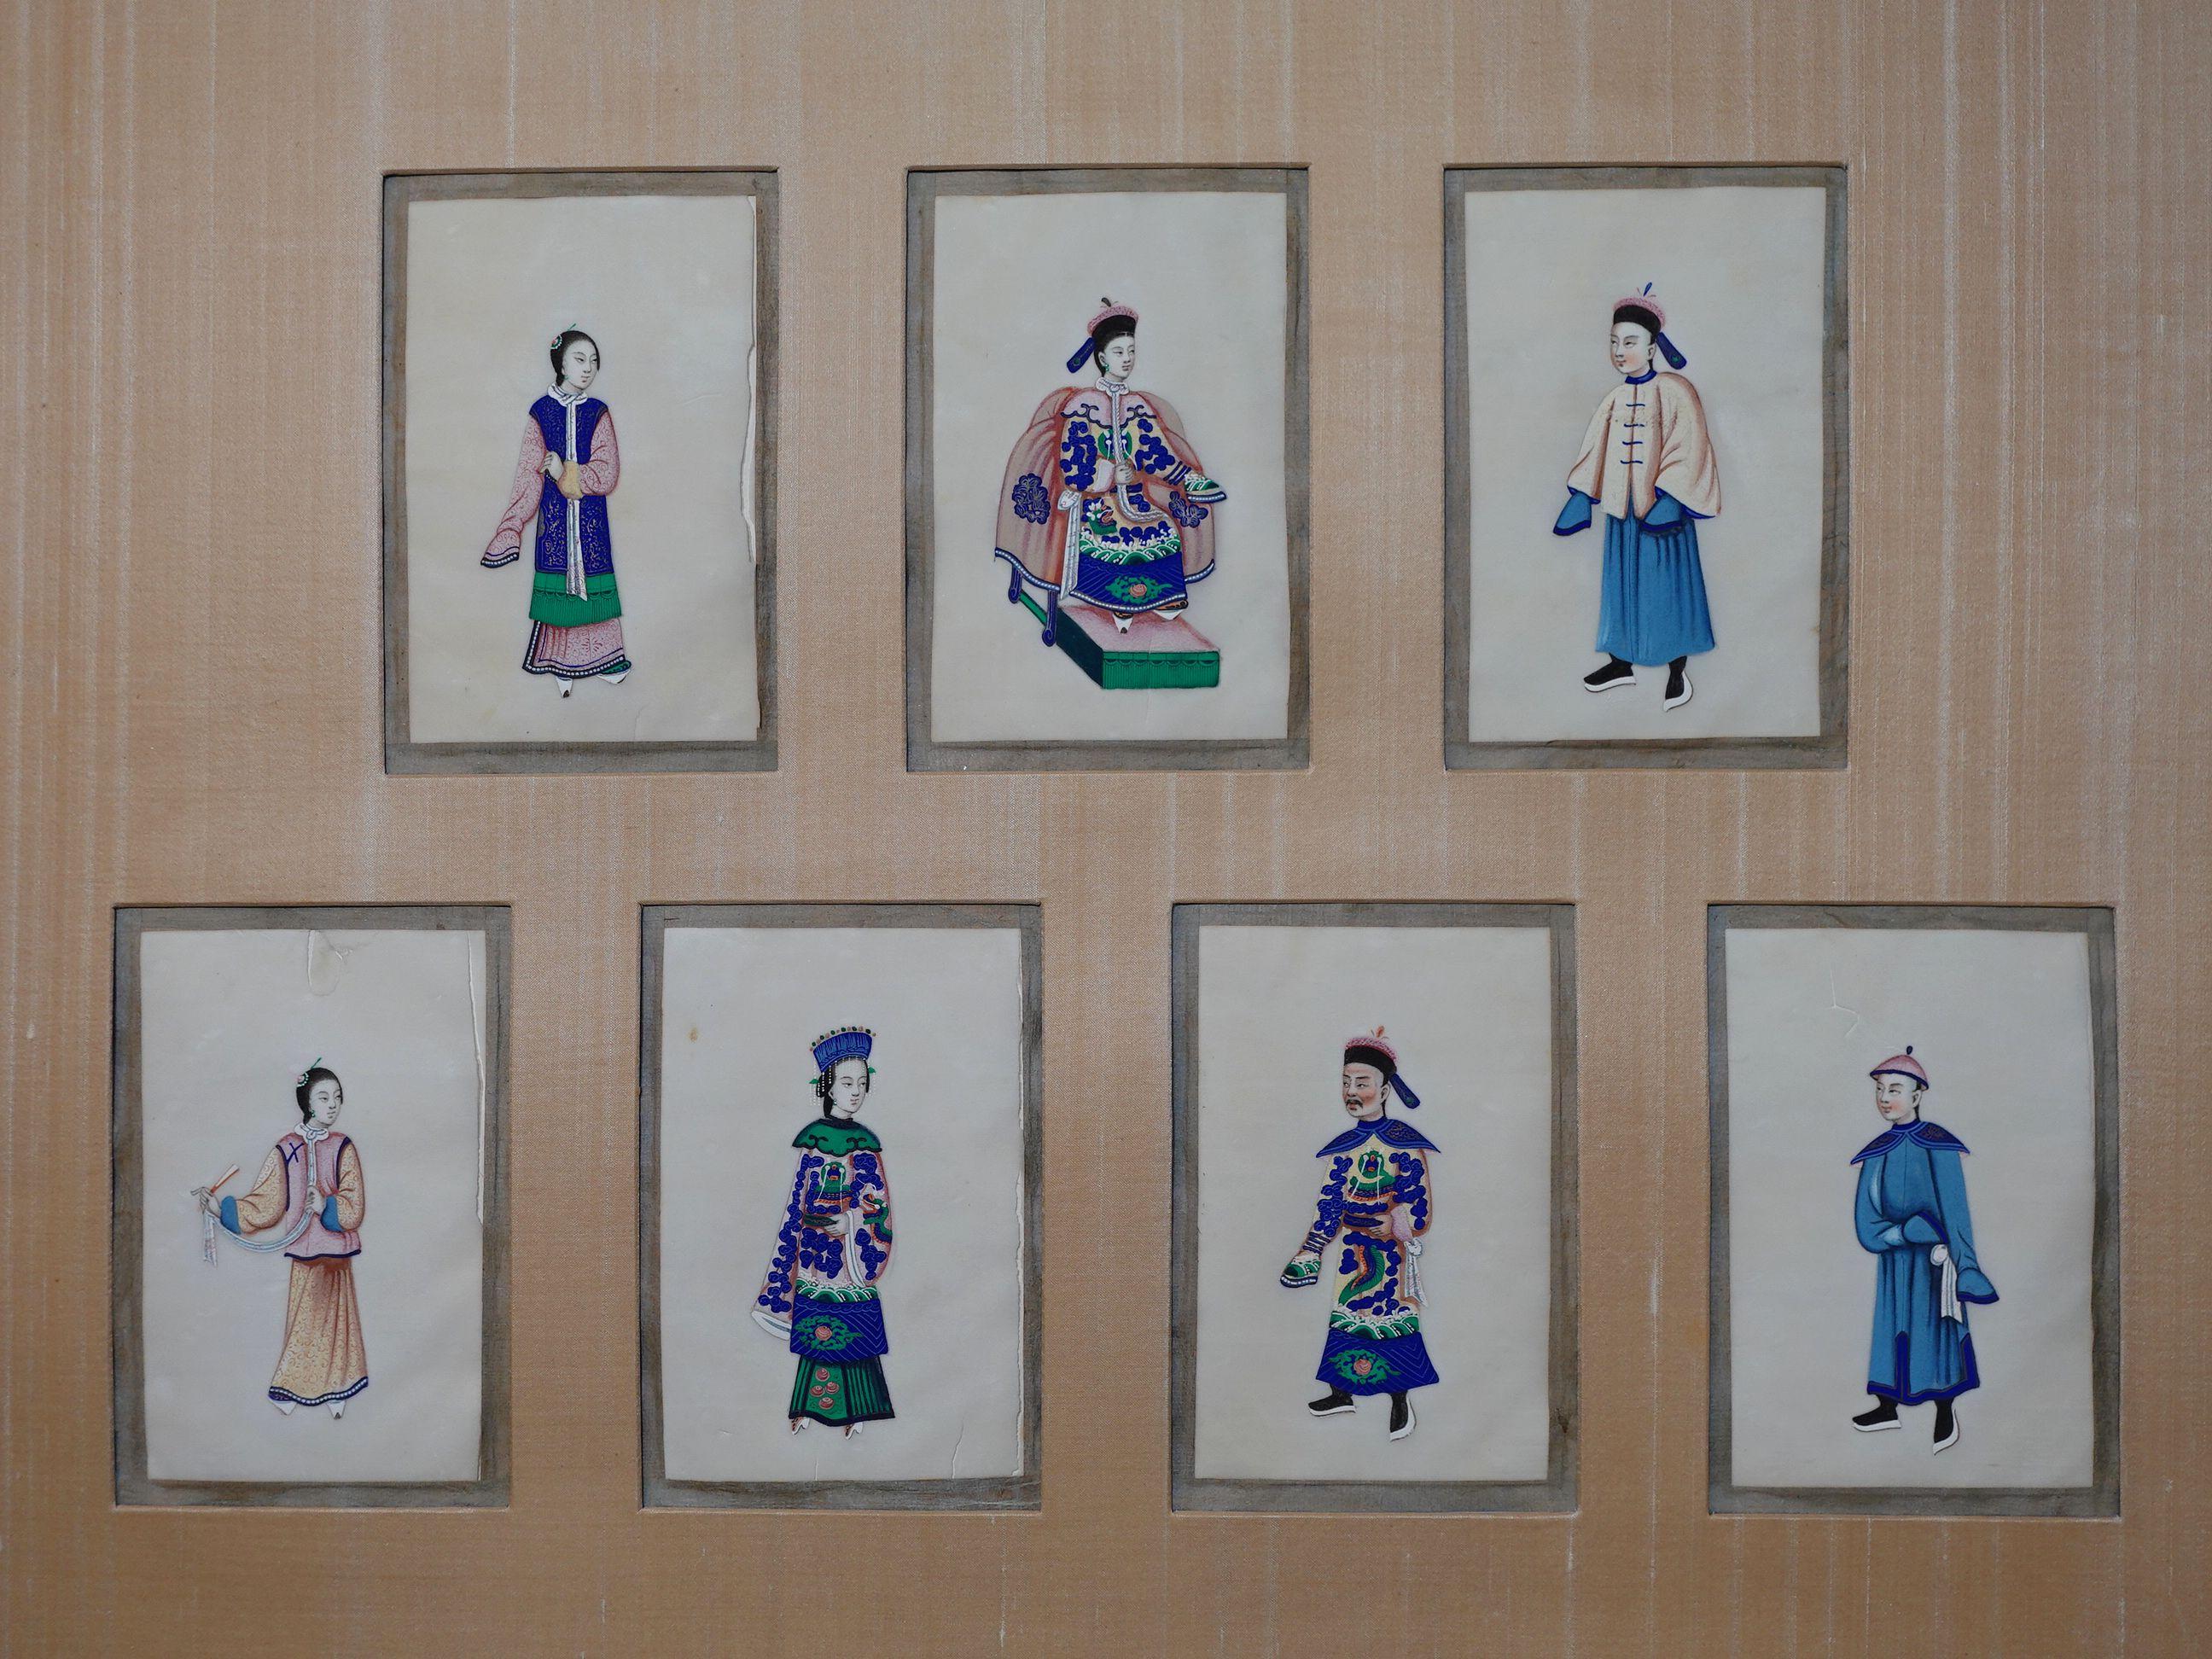 This listing is for a beautiful set of 7 Chinese Export Gouache (watercolor) paintings on rice/pith papers depicting the traditional Chinese costumes of men and women in the Great Qing Dynasty. They have been professionally framed under glass. The